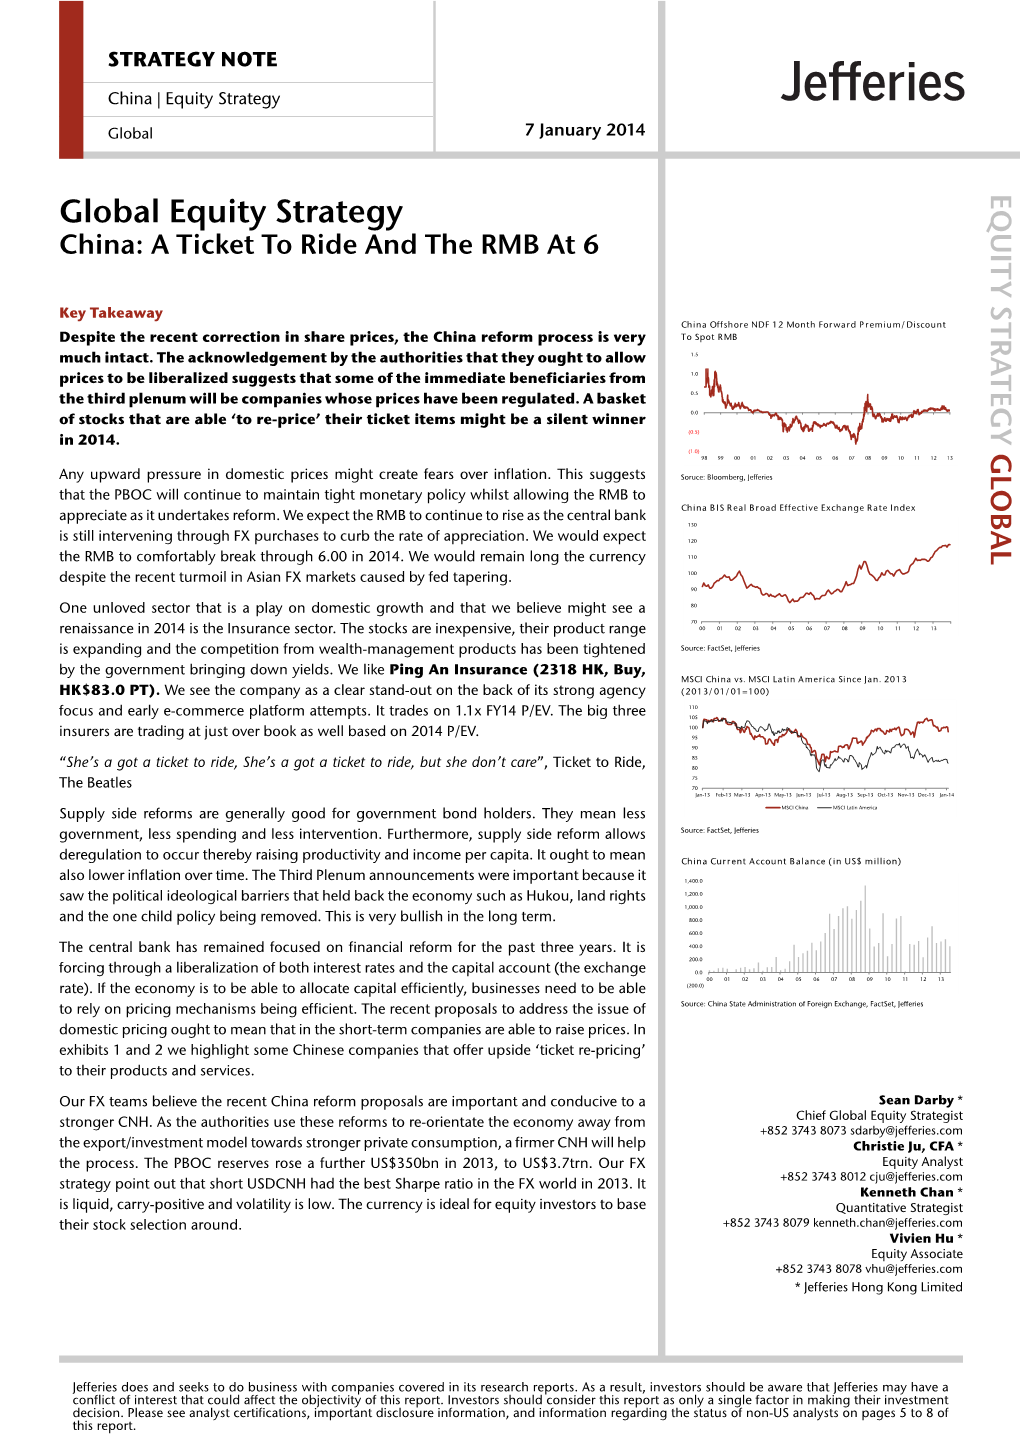 Global Equity Strategy China: a Ticket to Ride and the RMB at 6